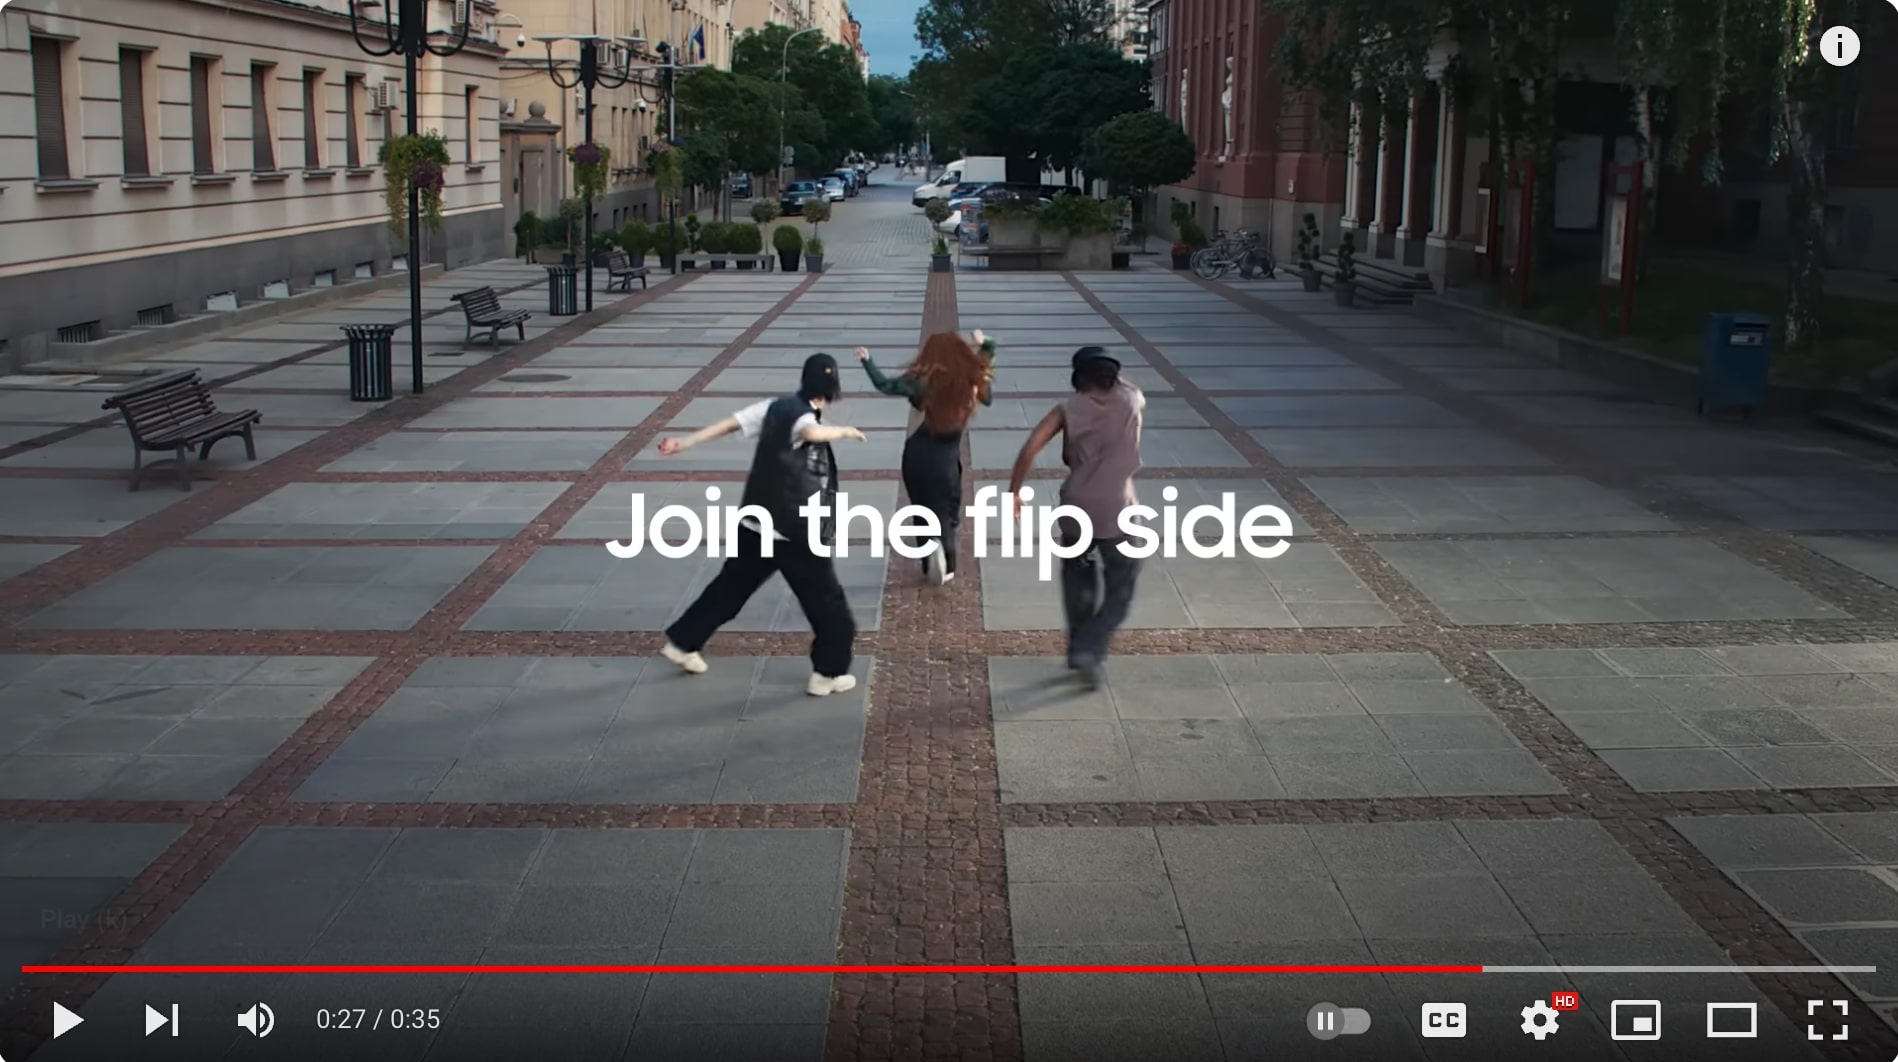 "Join the flip side" message in Samsung's ad